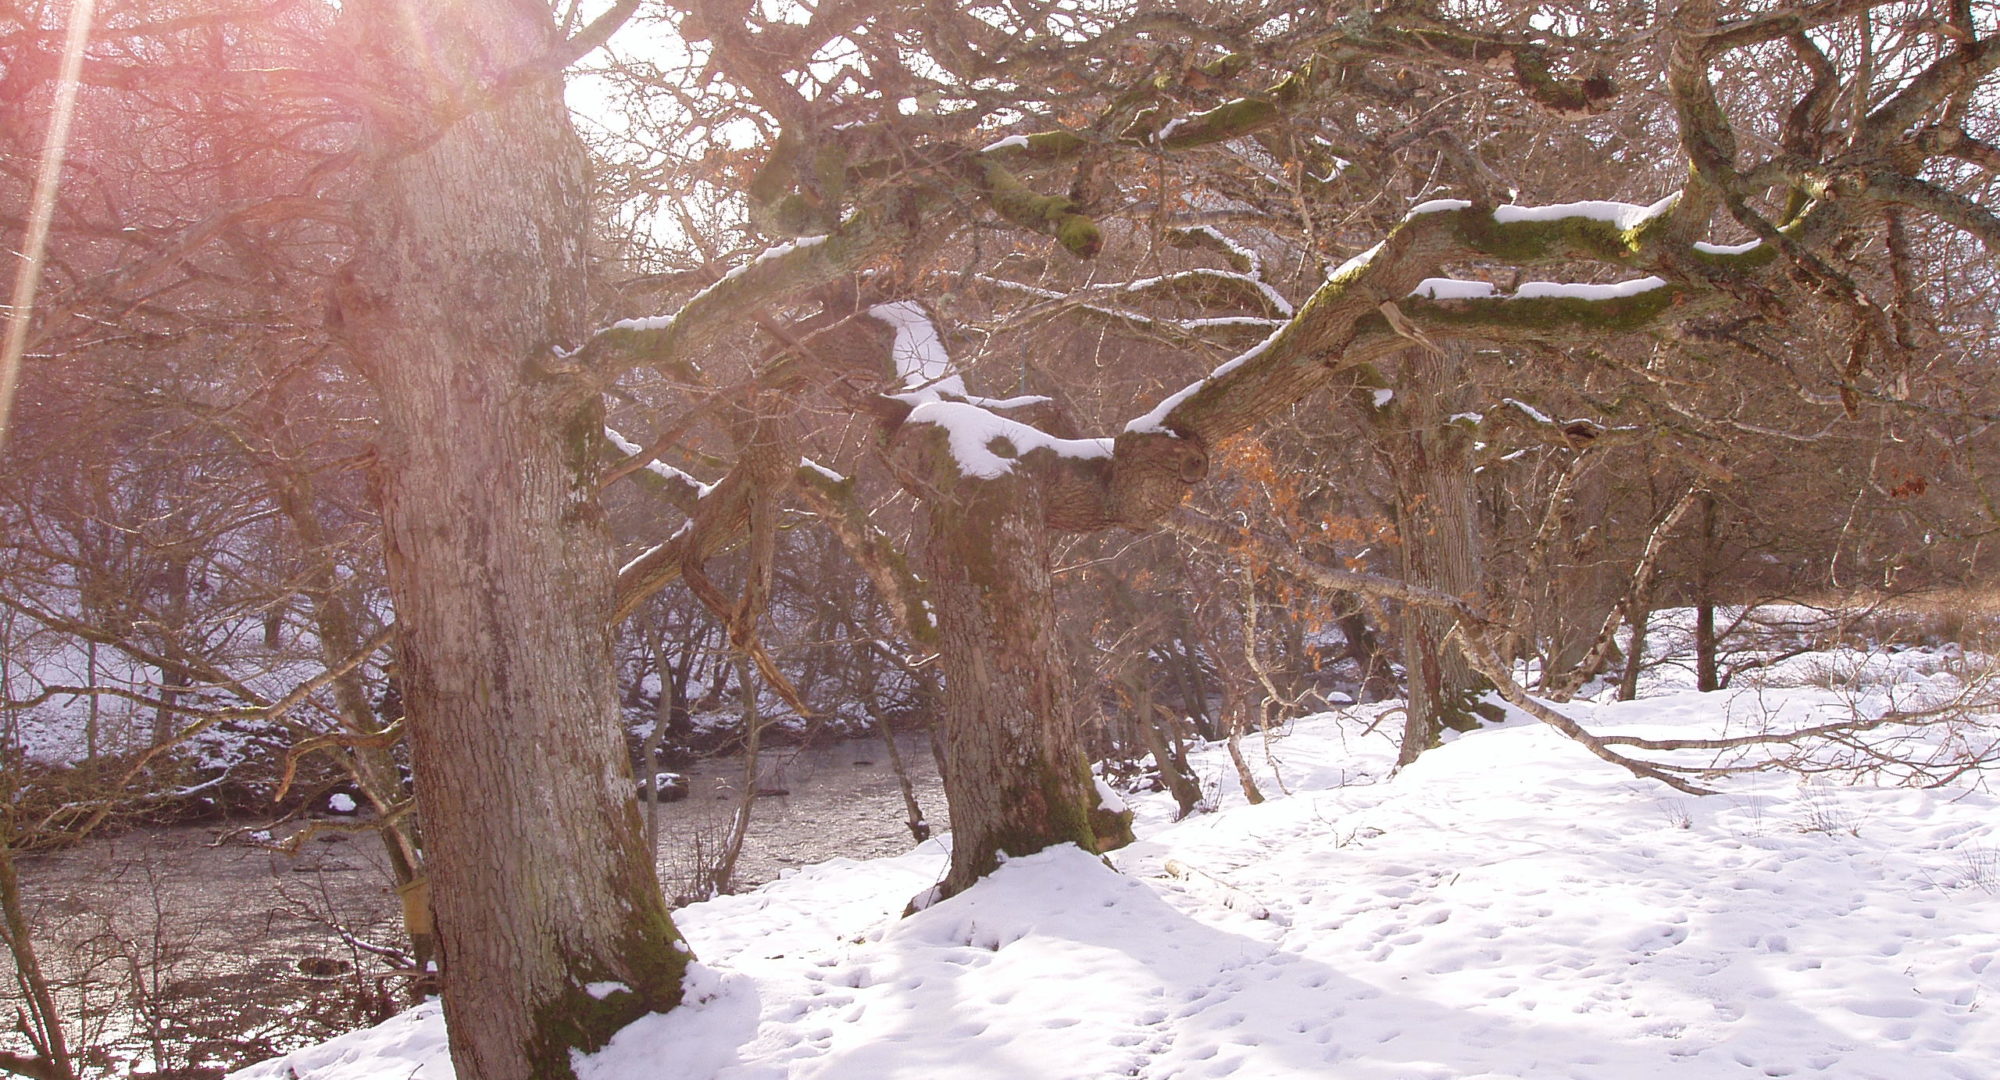 Winter scene by the river Wye with oak trees and snow on the ground.